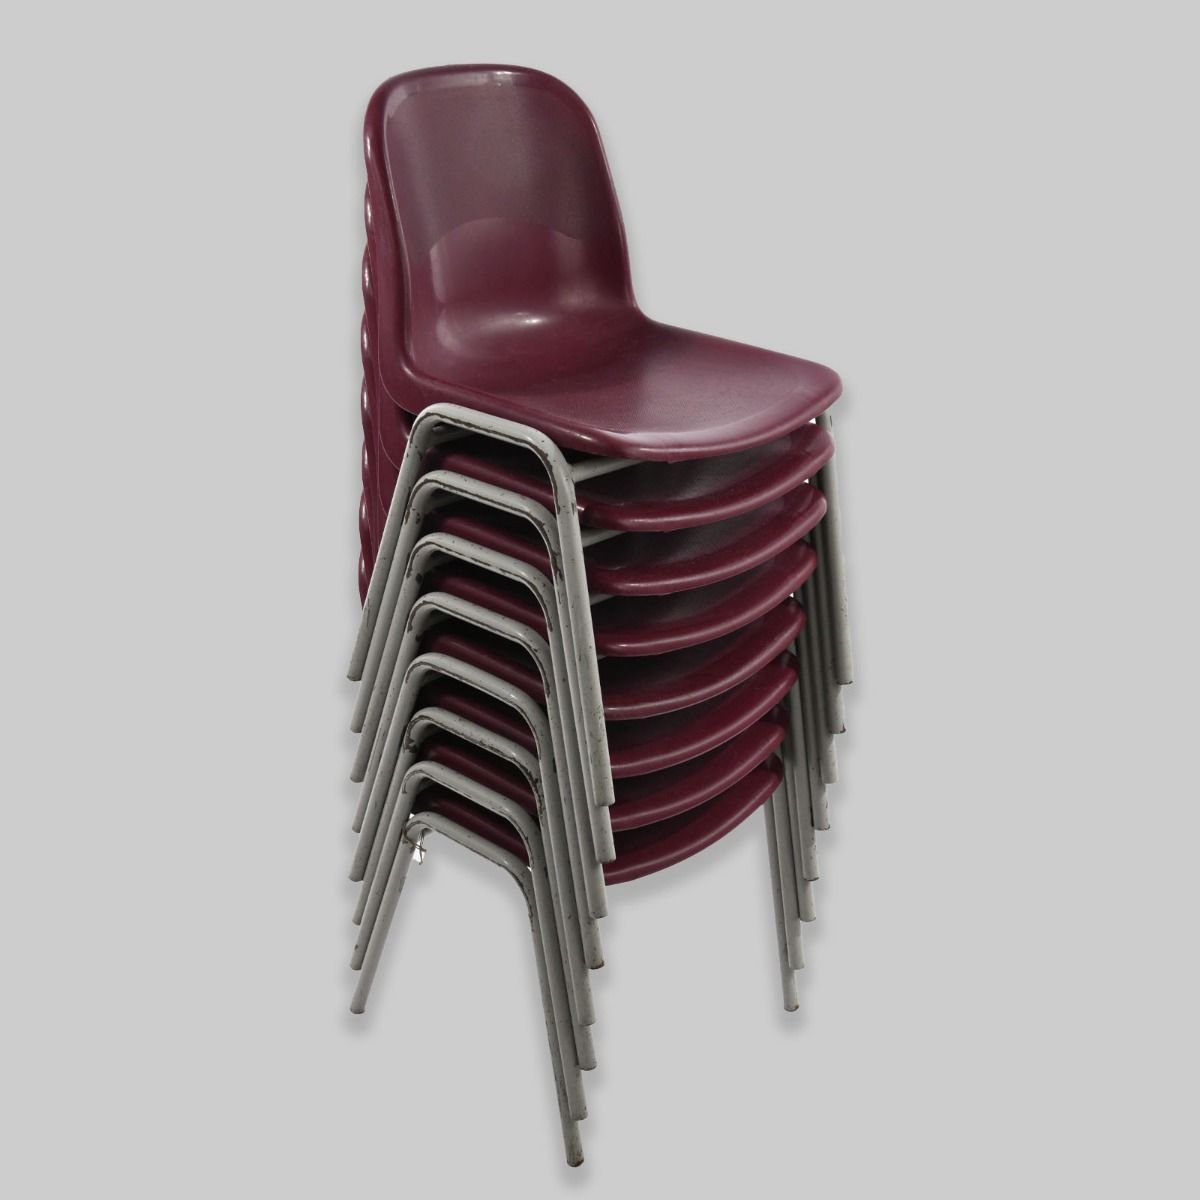 1980s Stackable Maroon Chairs